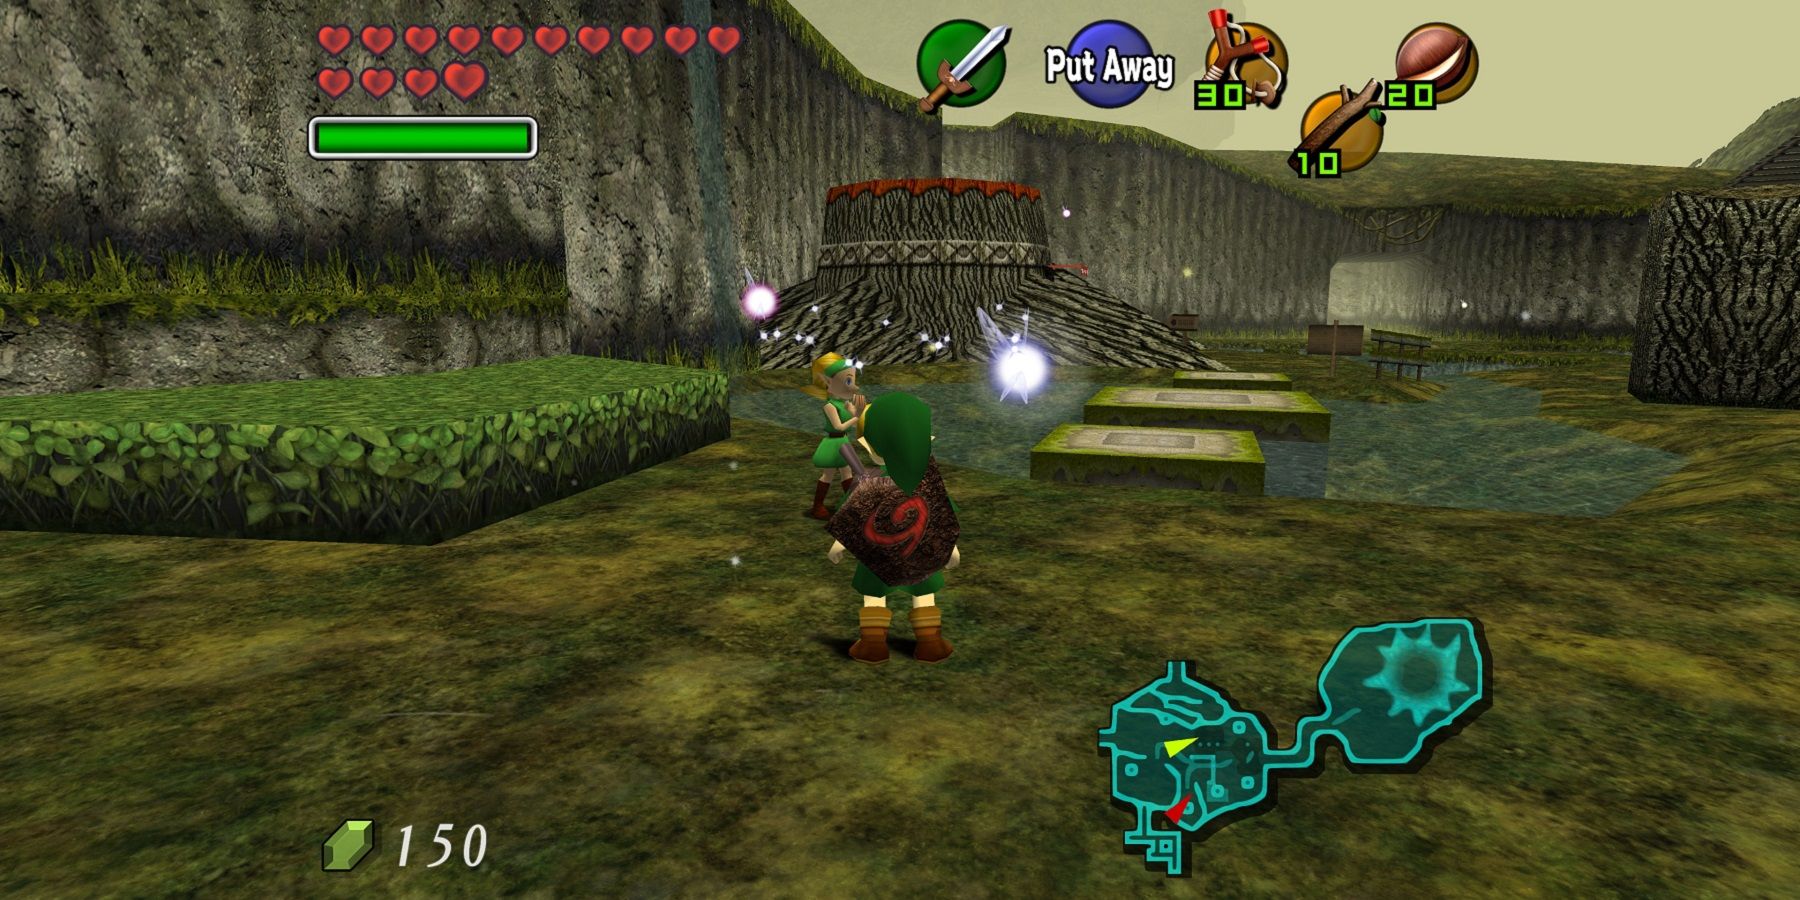 Image from Legend of Zelda: Ocarina of Time showing Link and Navi.